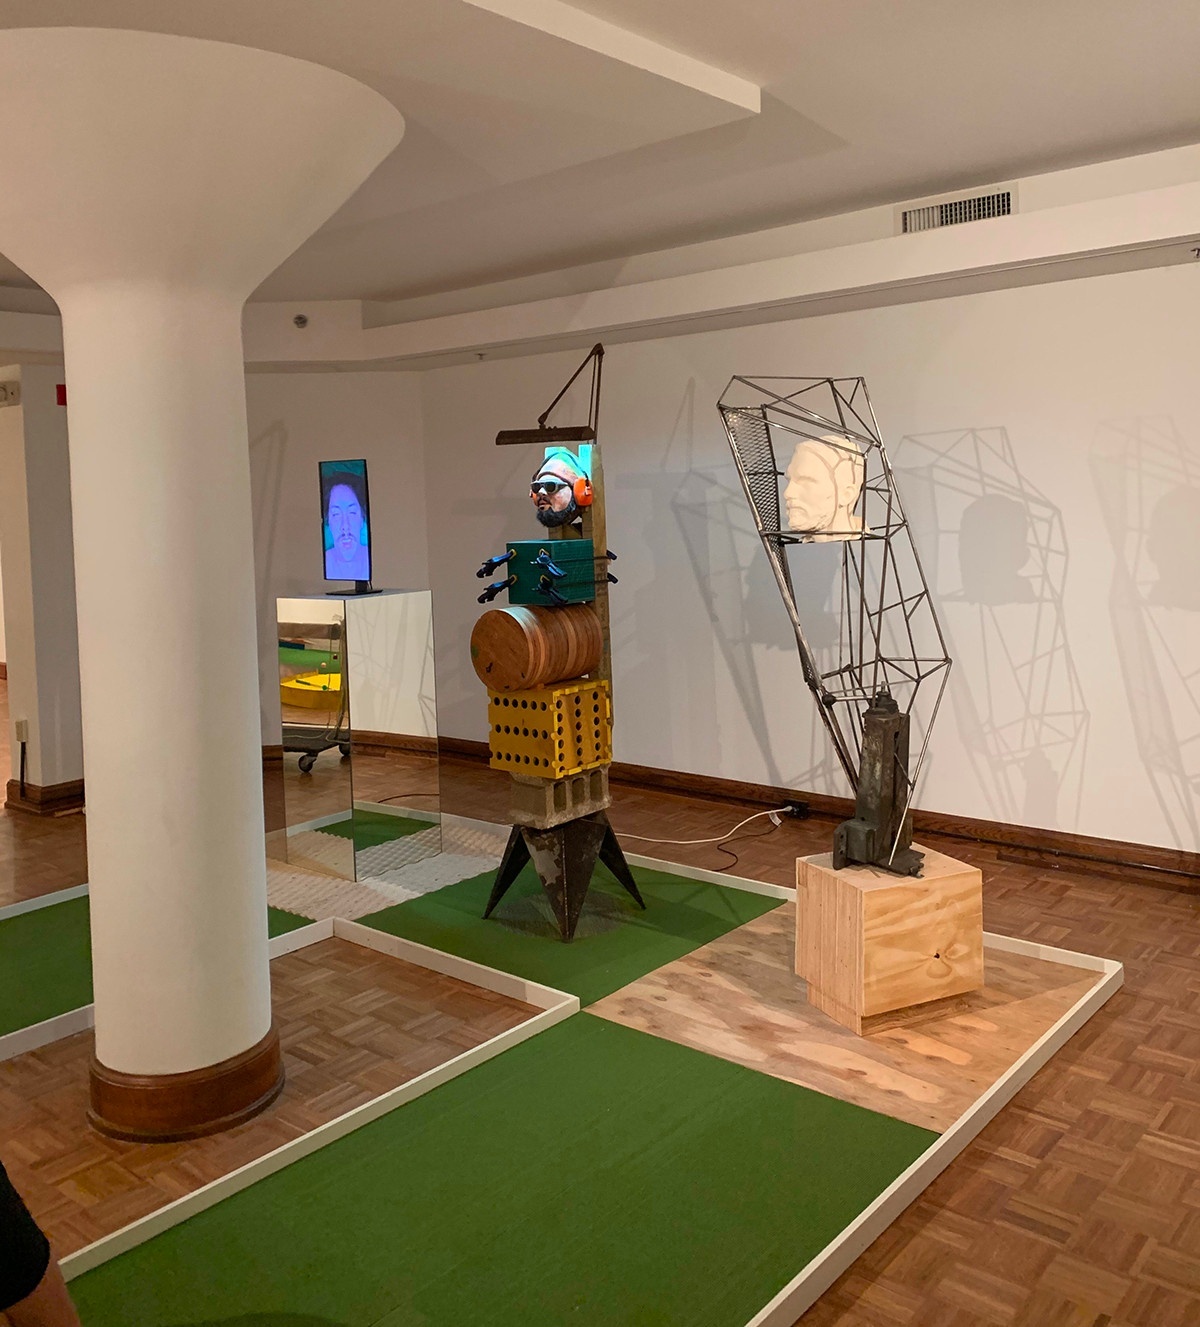 Miniature golf hole installed in an indoor gallery space. The hole design features three tall sculptural elements, two featuring scultped heads and the third featuring a digital version of a head.